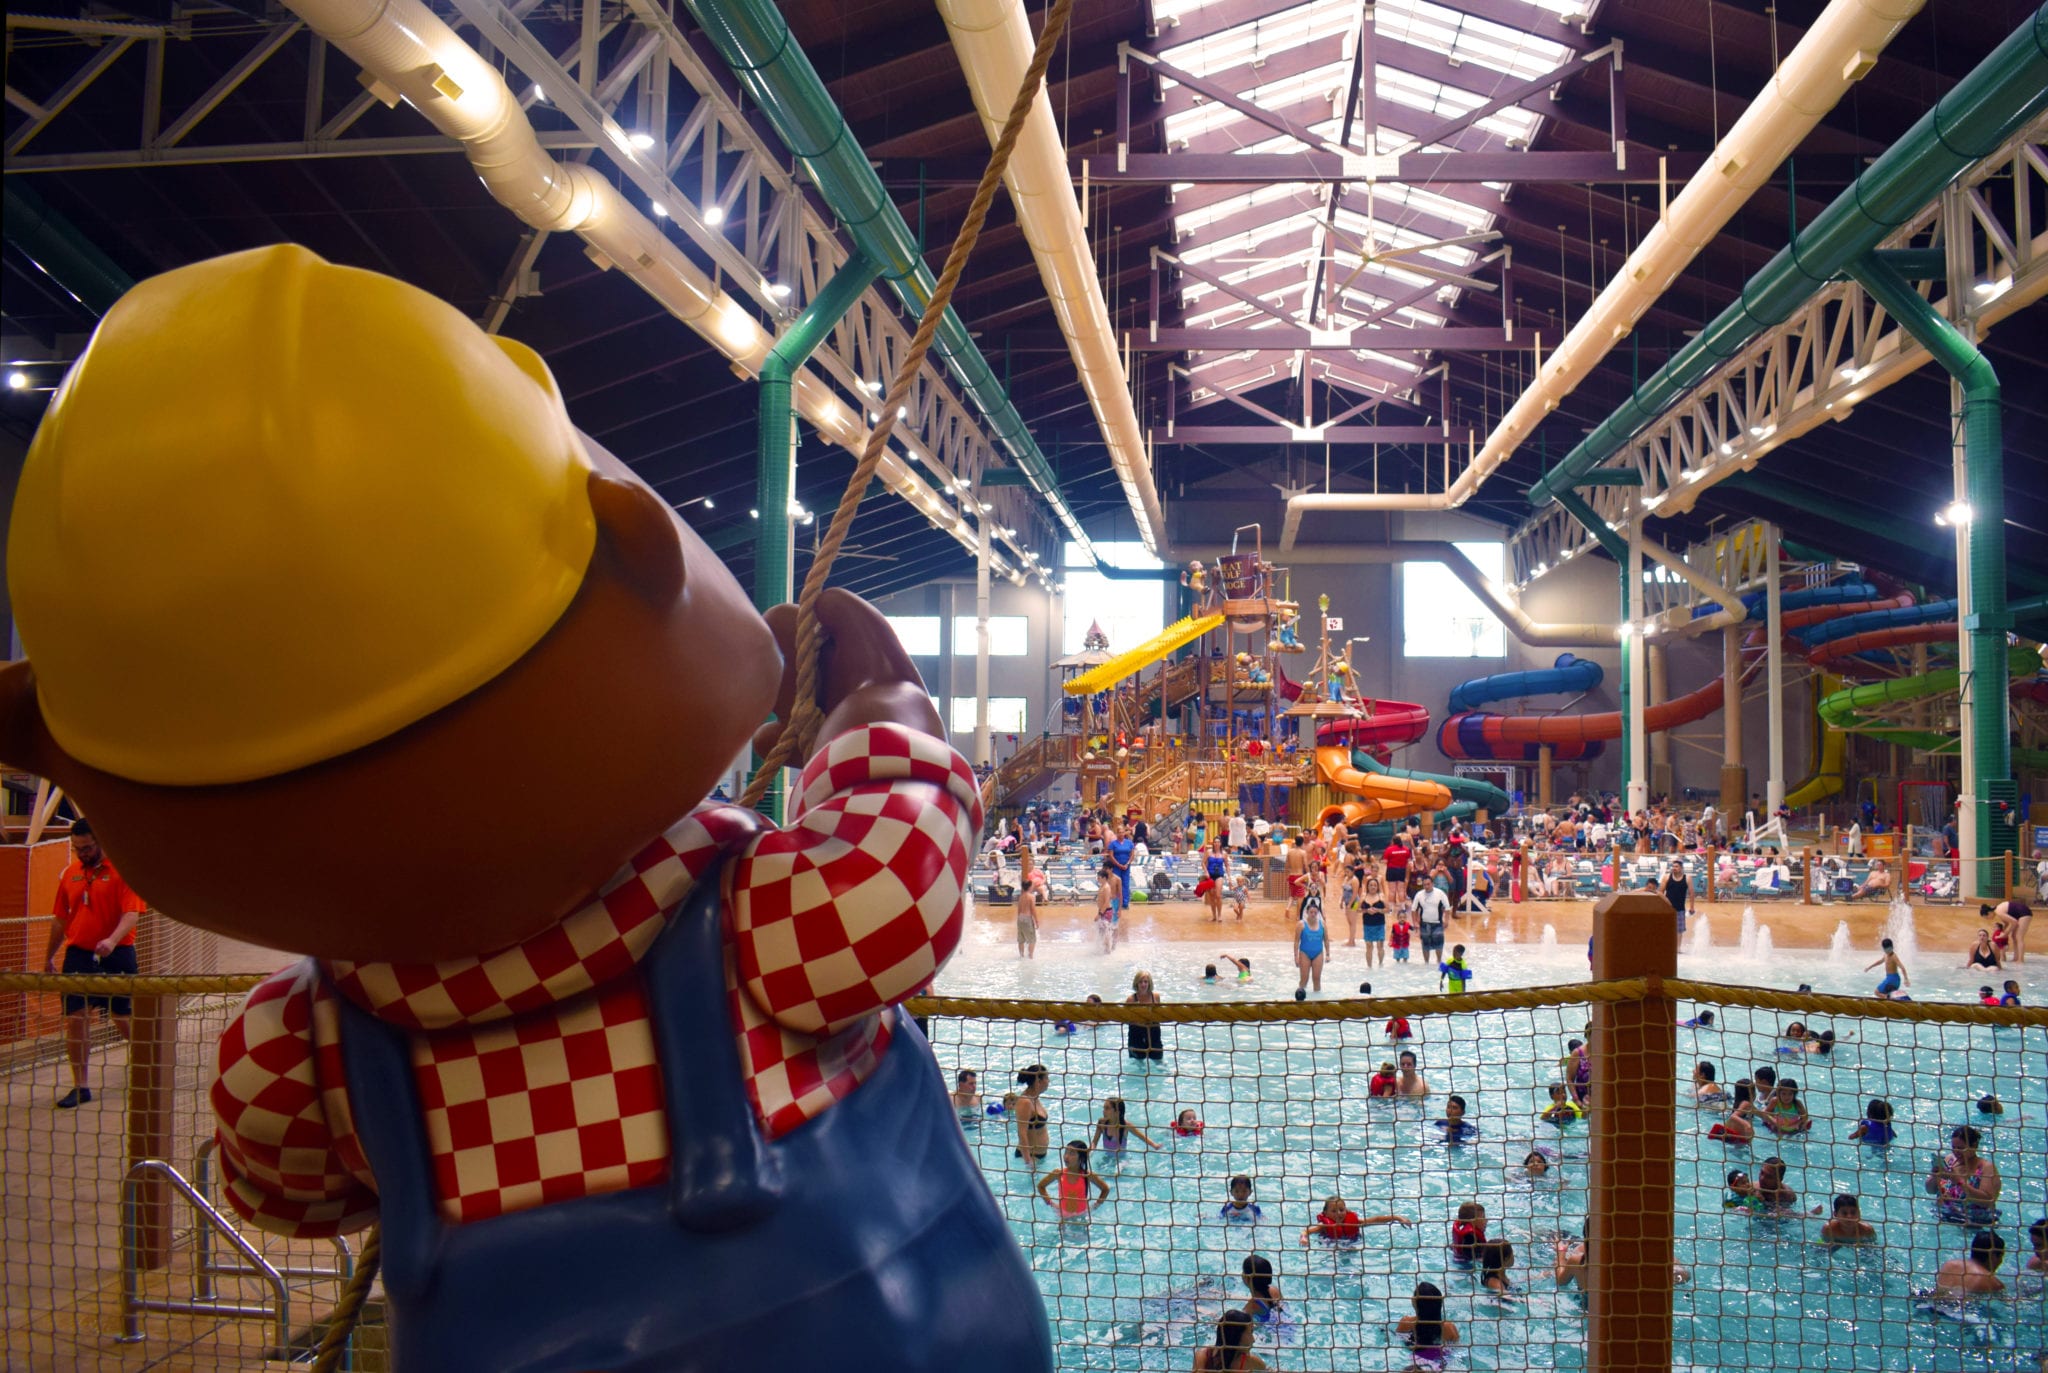 great wolf lodge locations florida